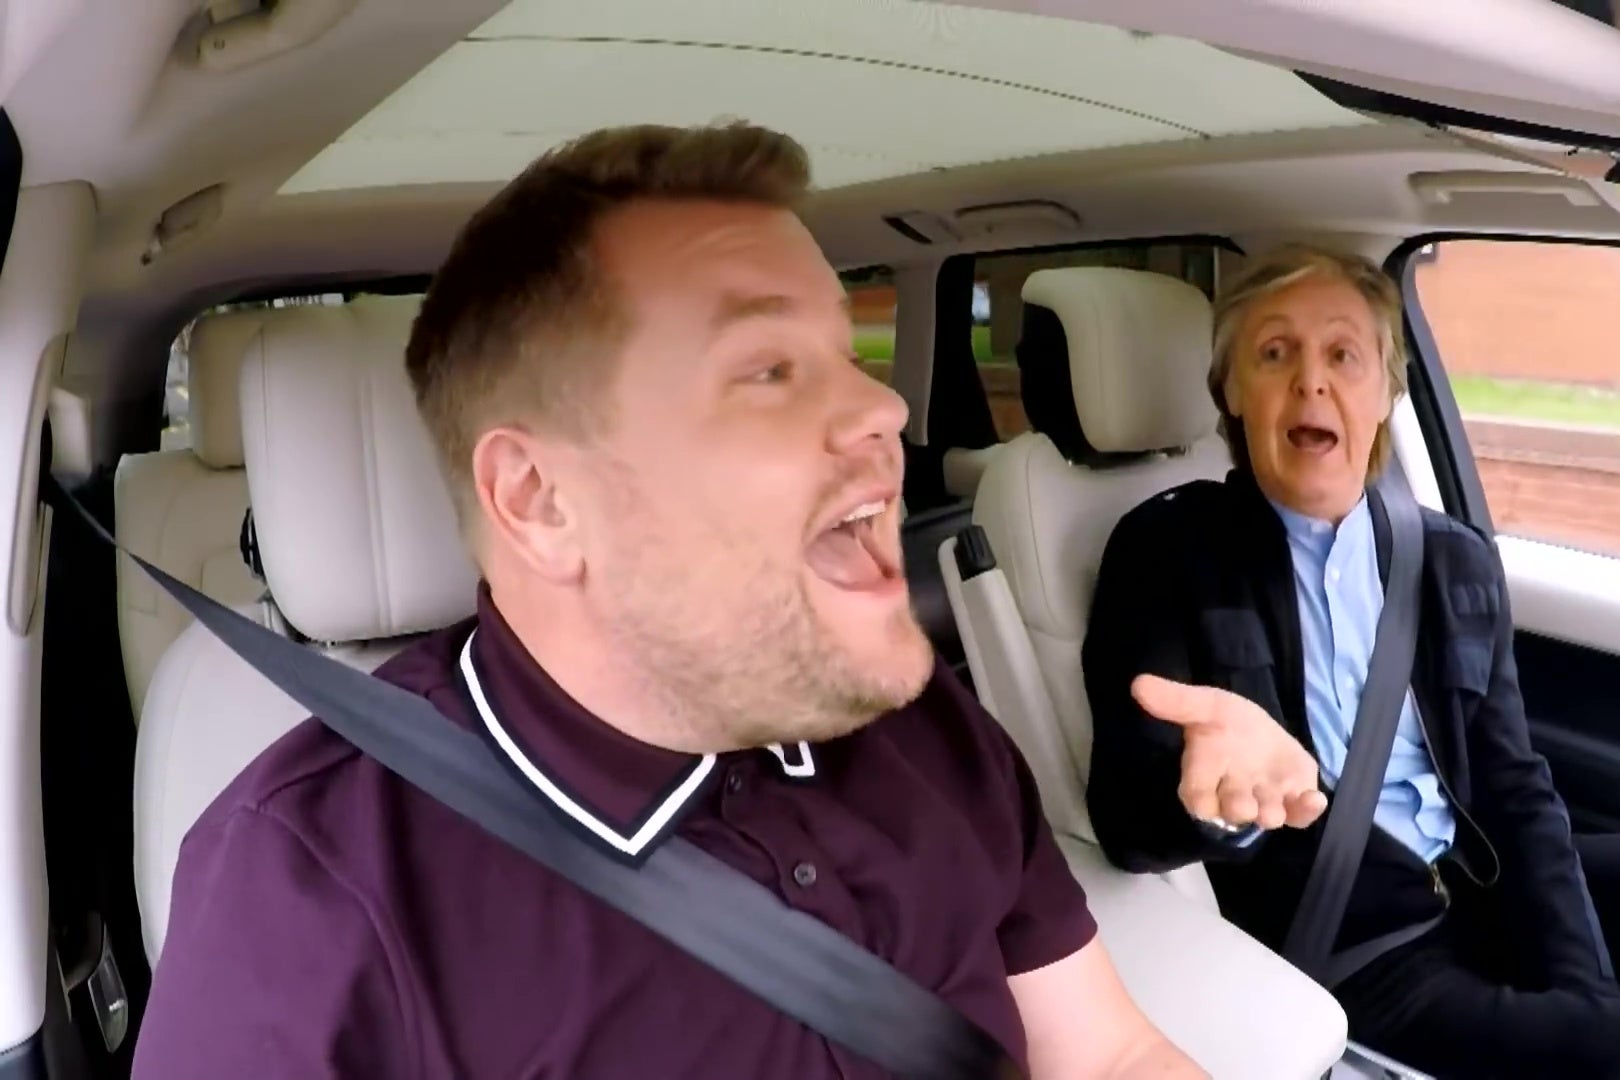 James Corden and Paul McCartney singing in a car.